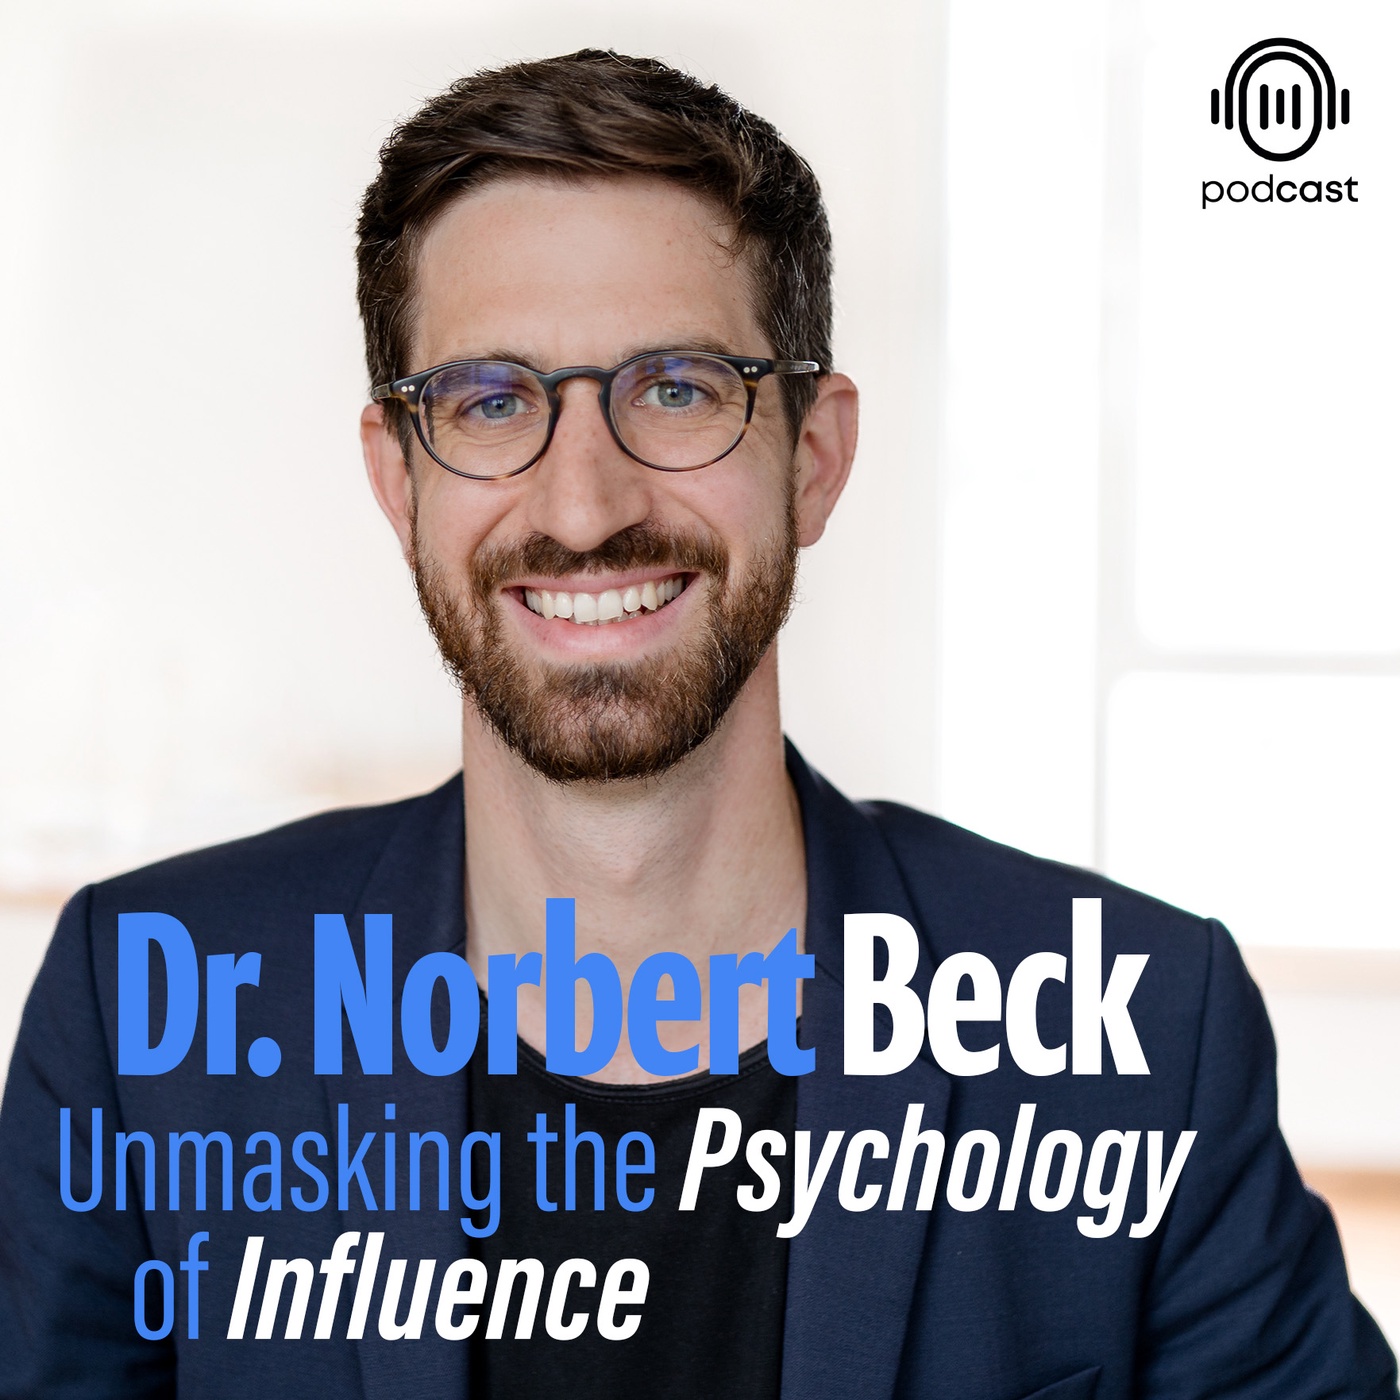 Dr. Norbert Beck - Unmasking the Psychology of Influence